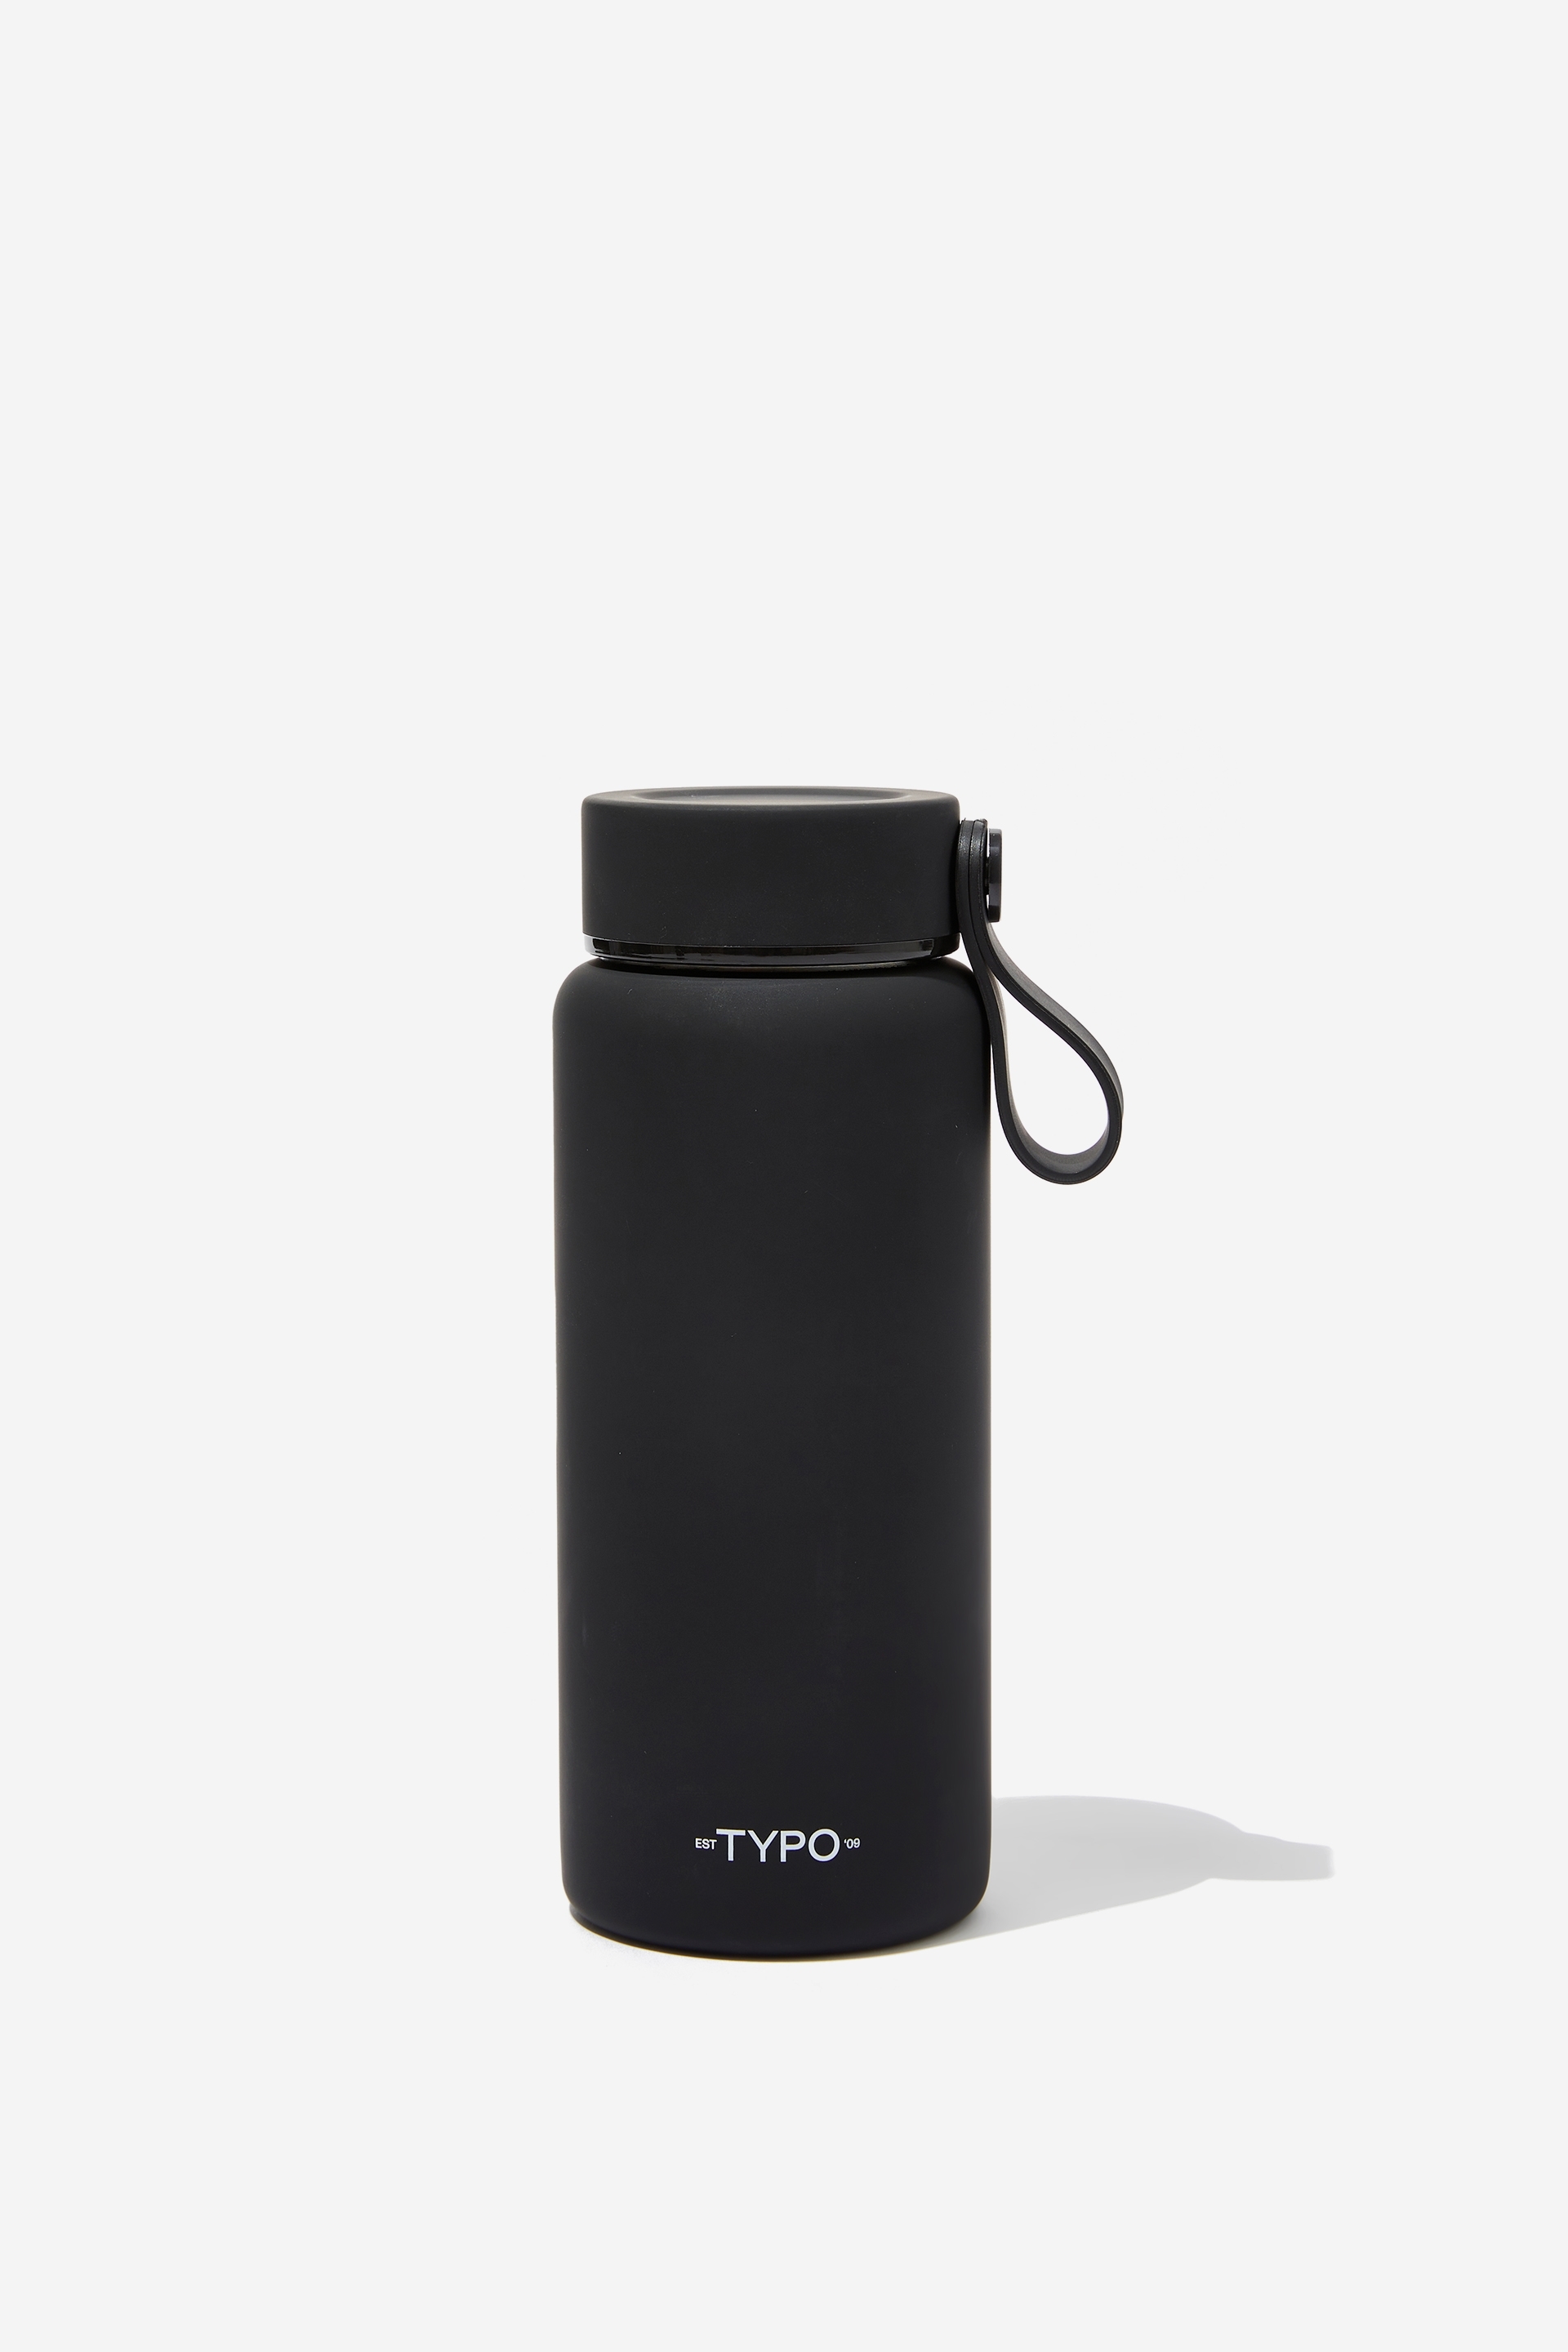 Typo - On The Move Drink Bottle 350ML 2.0 - Black